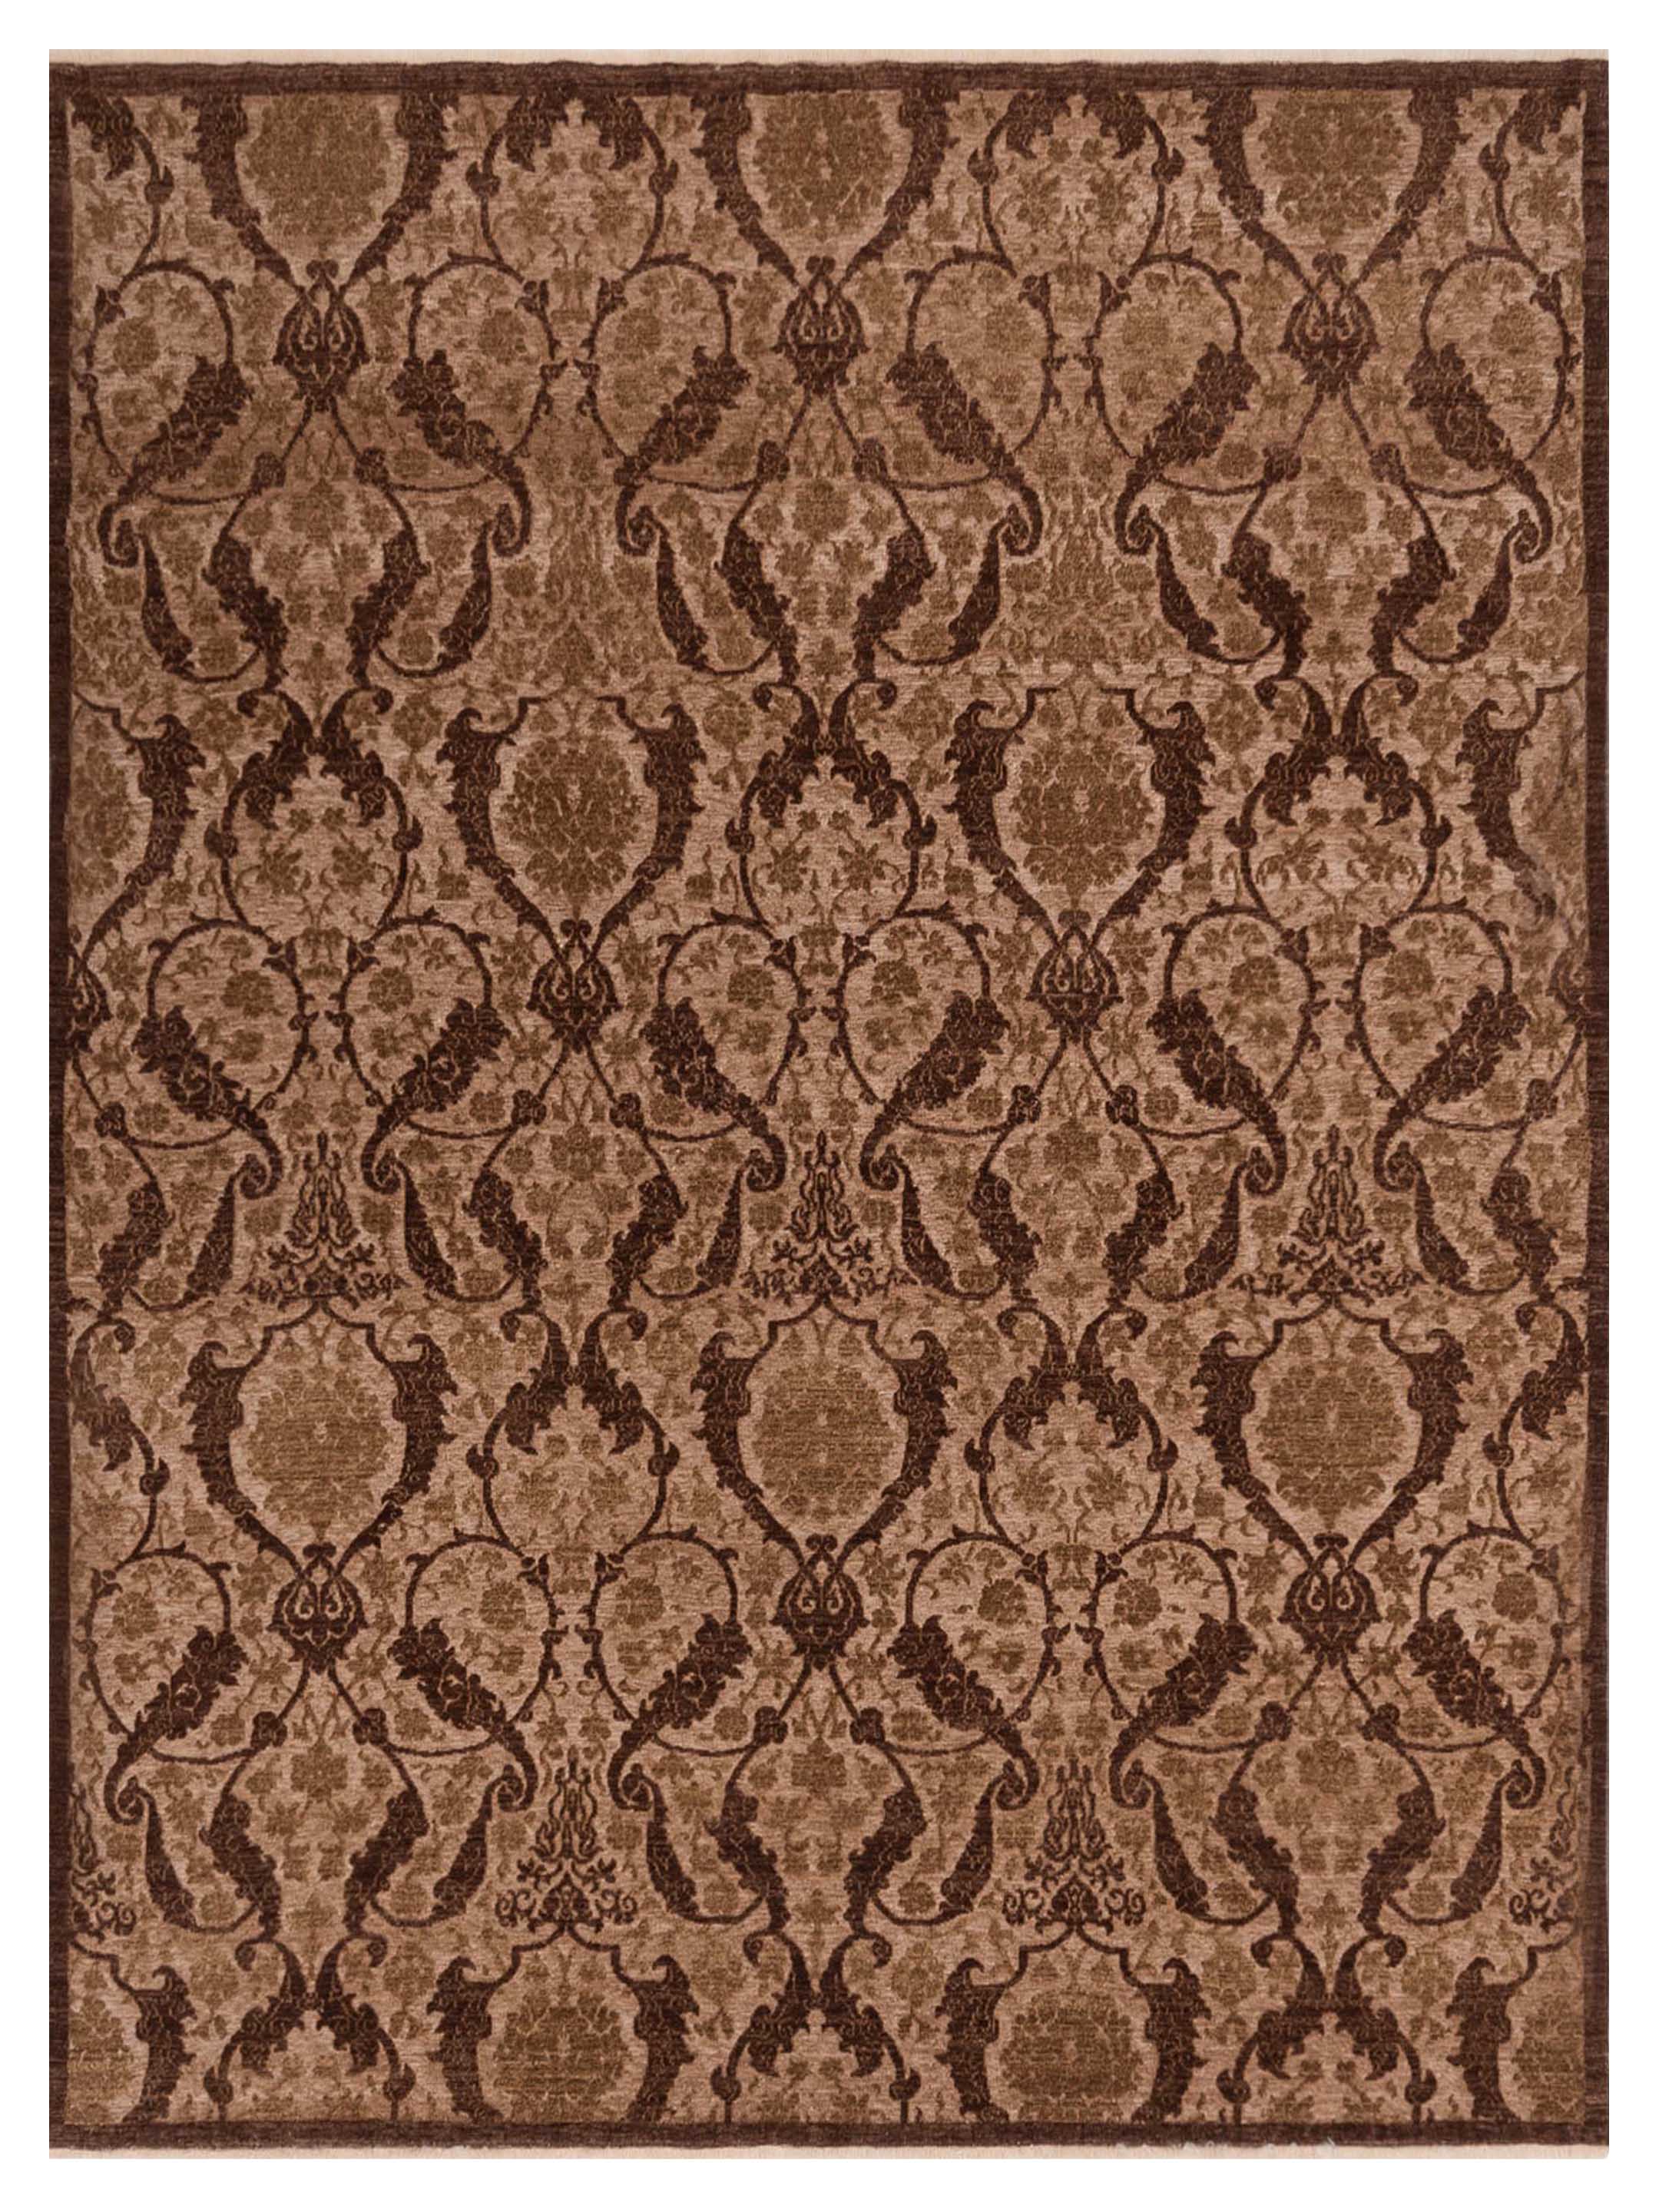 Transitional Brown 8x10 Area Rug	